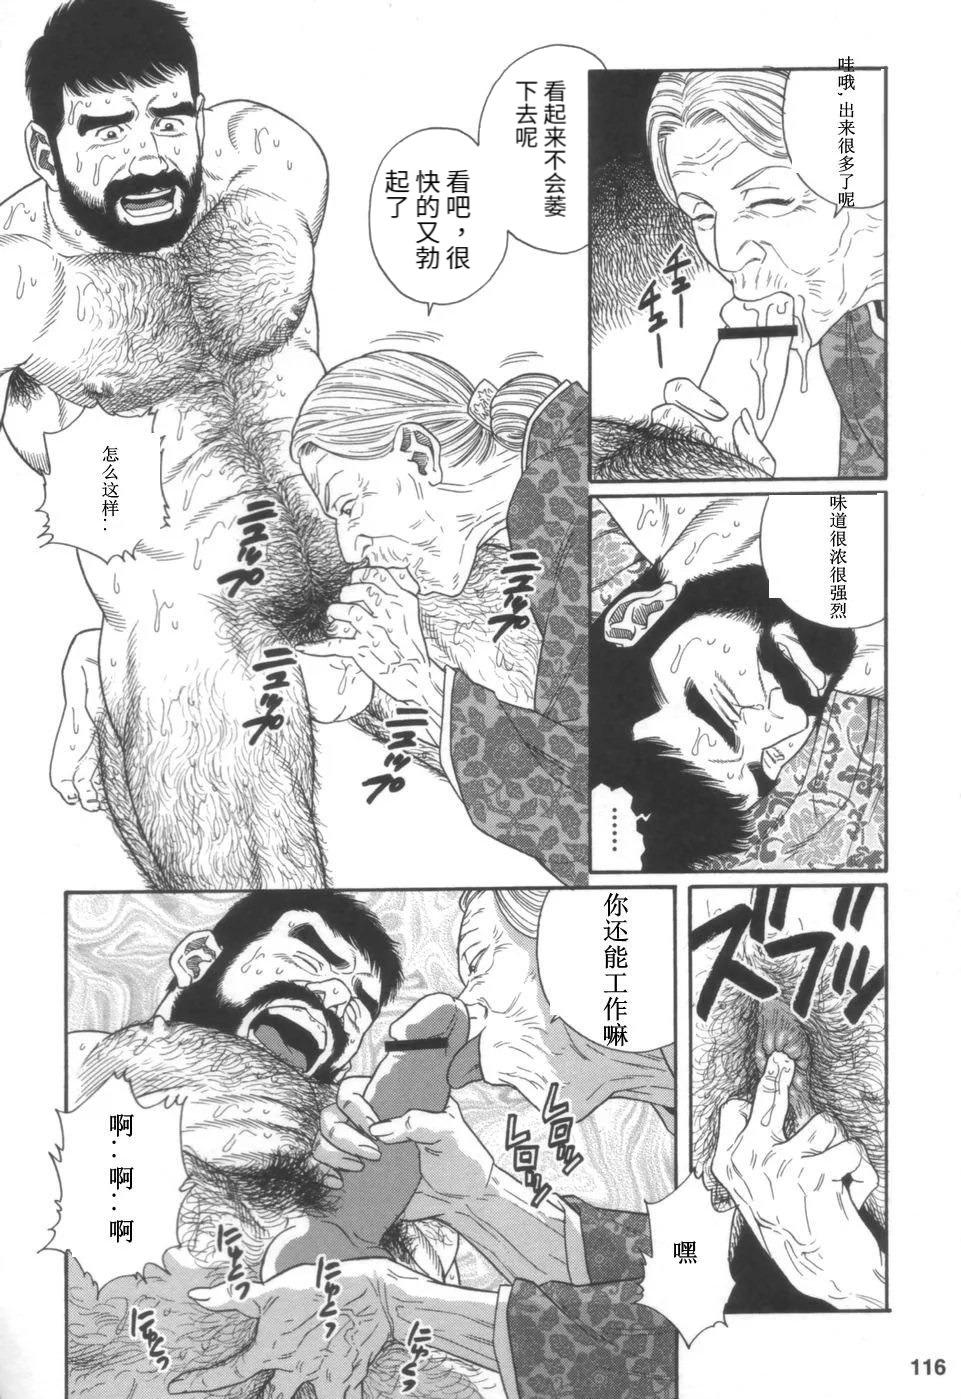 Shot Gedou no Ie Joukan | 邪道之家 Vol. 1 Ch.4 Making Love Porn - Page 10